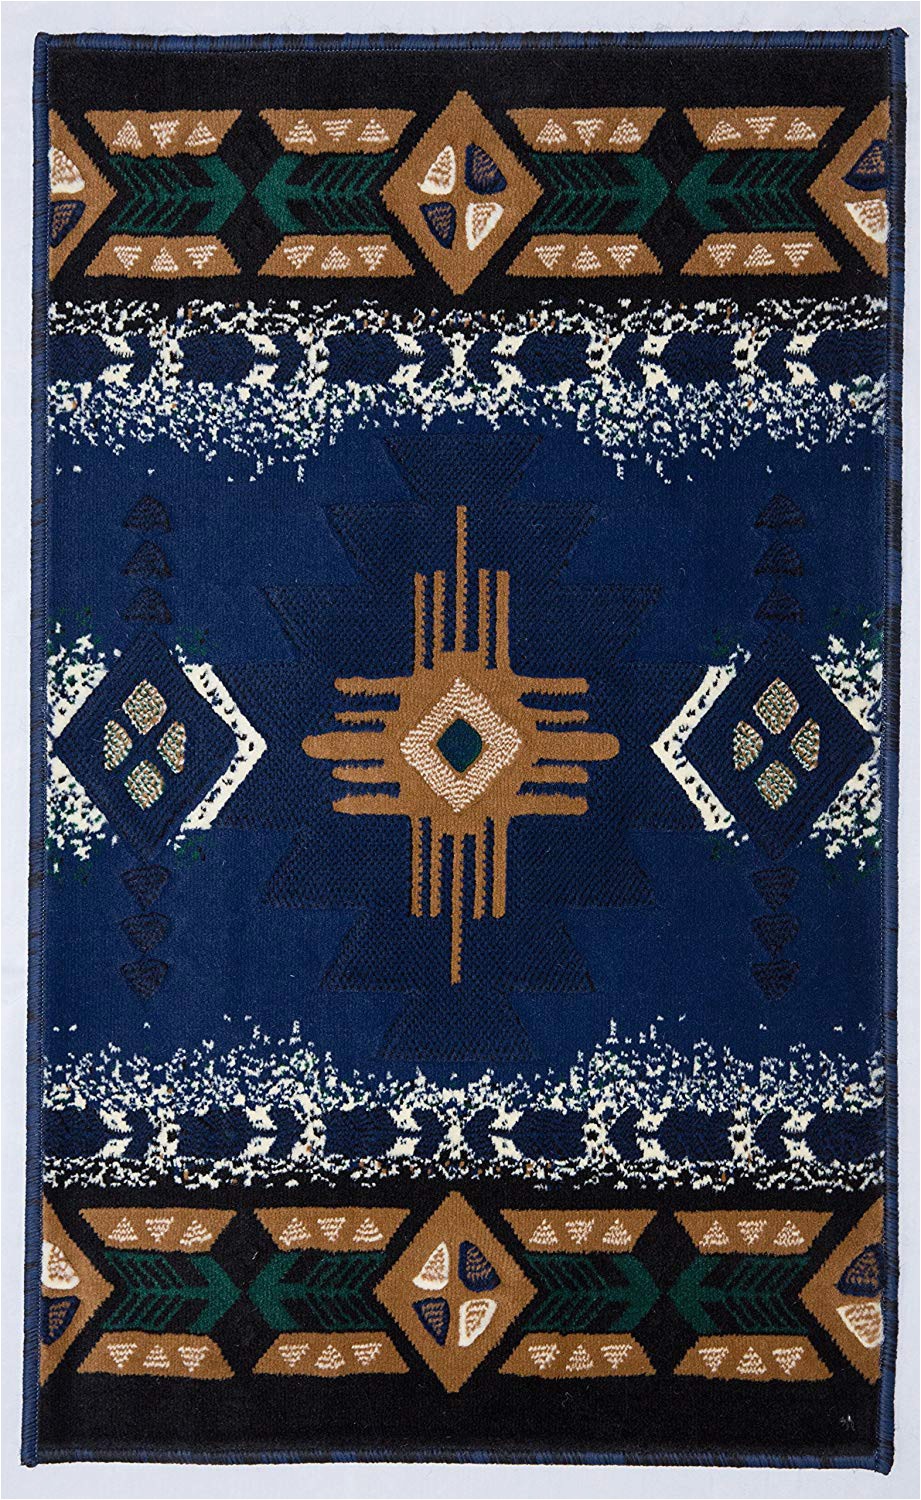 rugs 4 less collection southwest native american indian area rug design r4l 318 burgundy maroon 5 2 x7 2